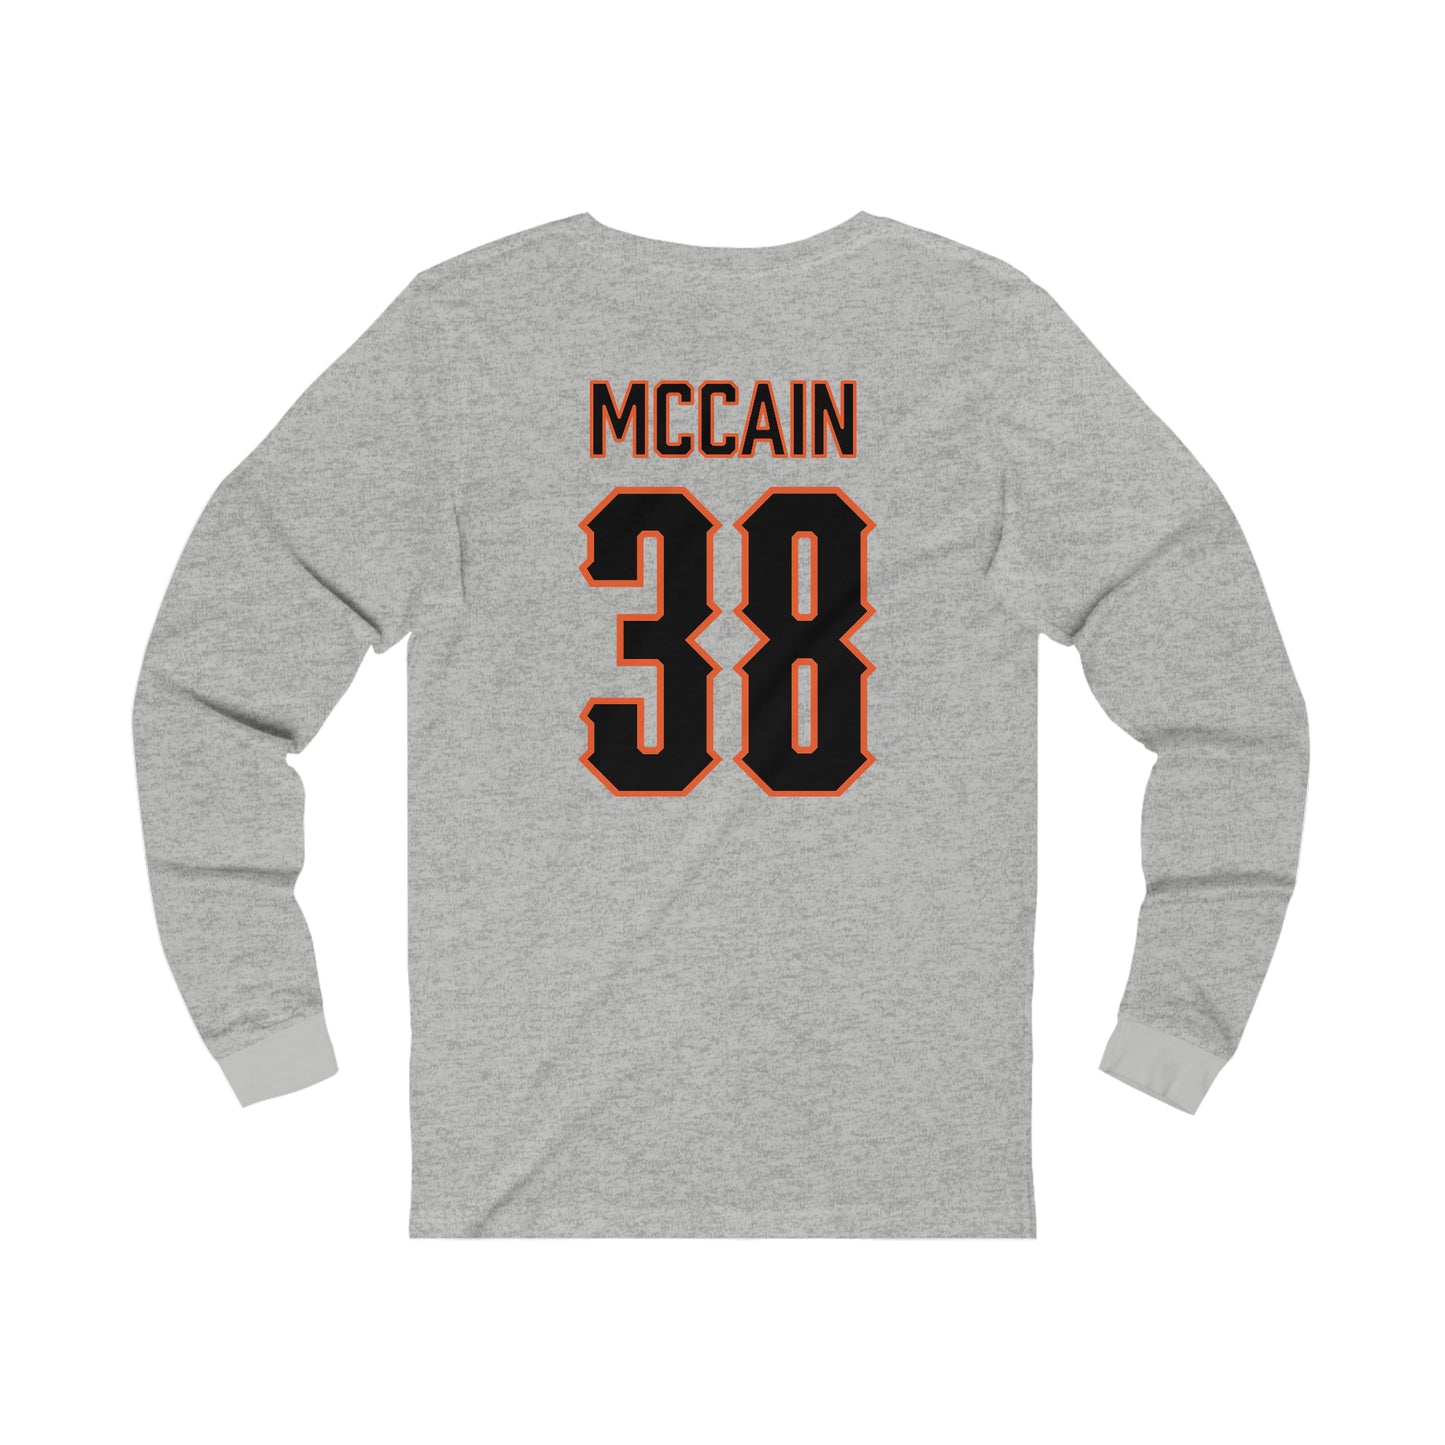 Bryce McCain #38 Pitching Pete Long Sleeve